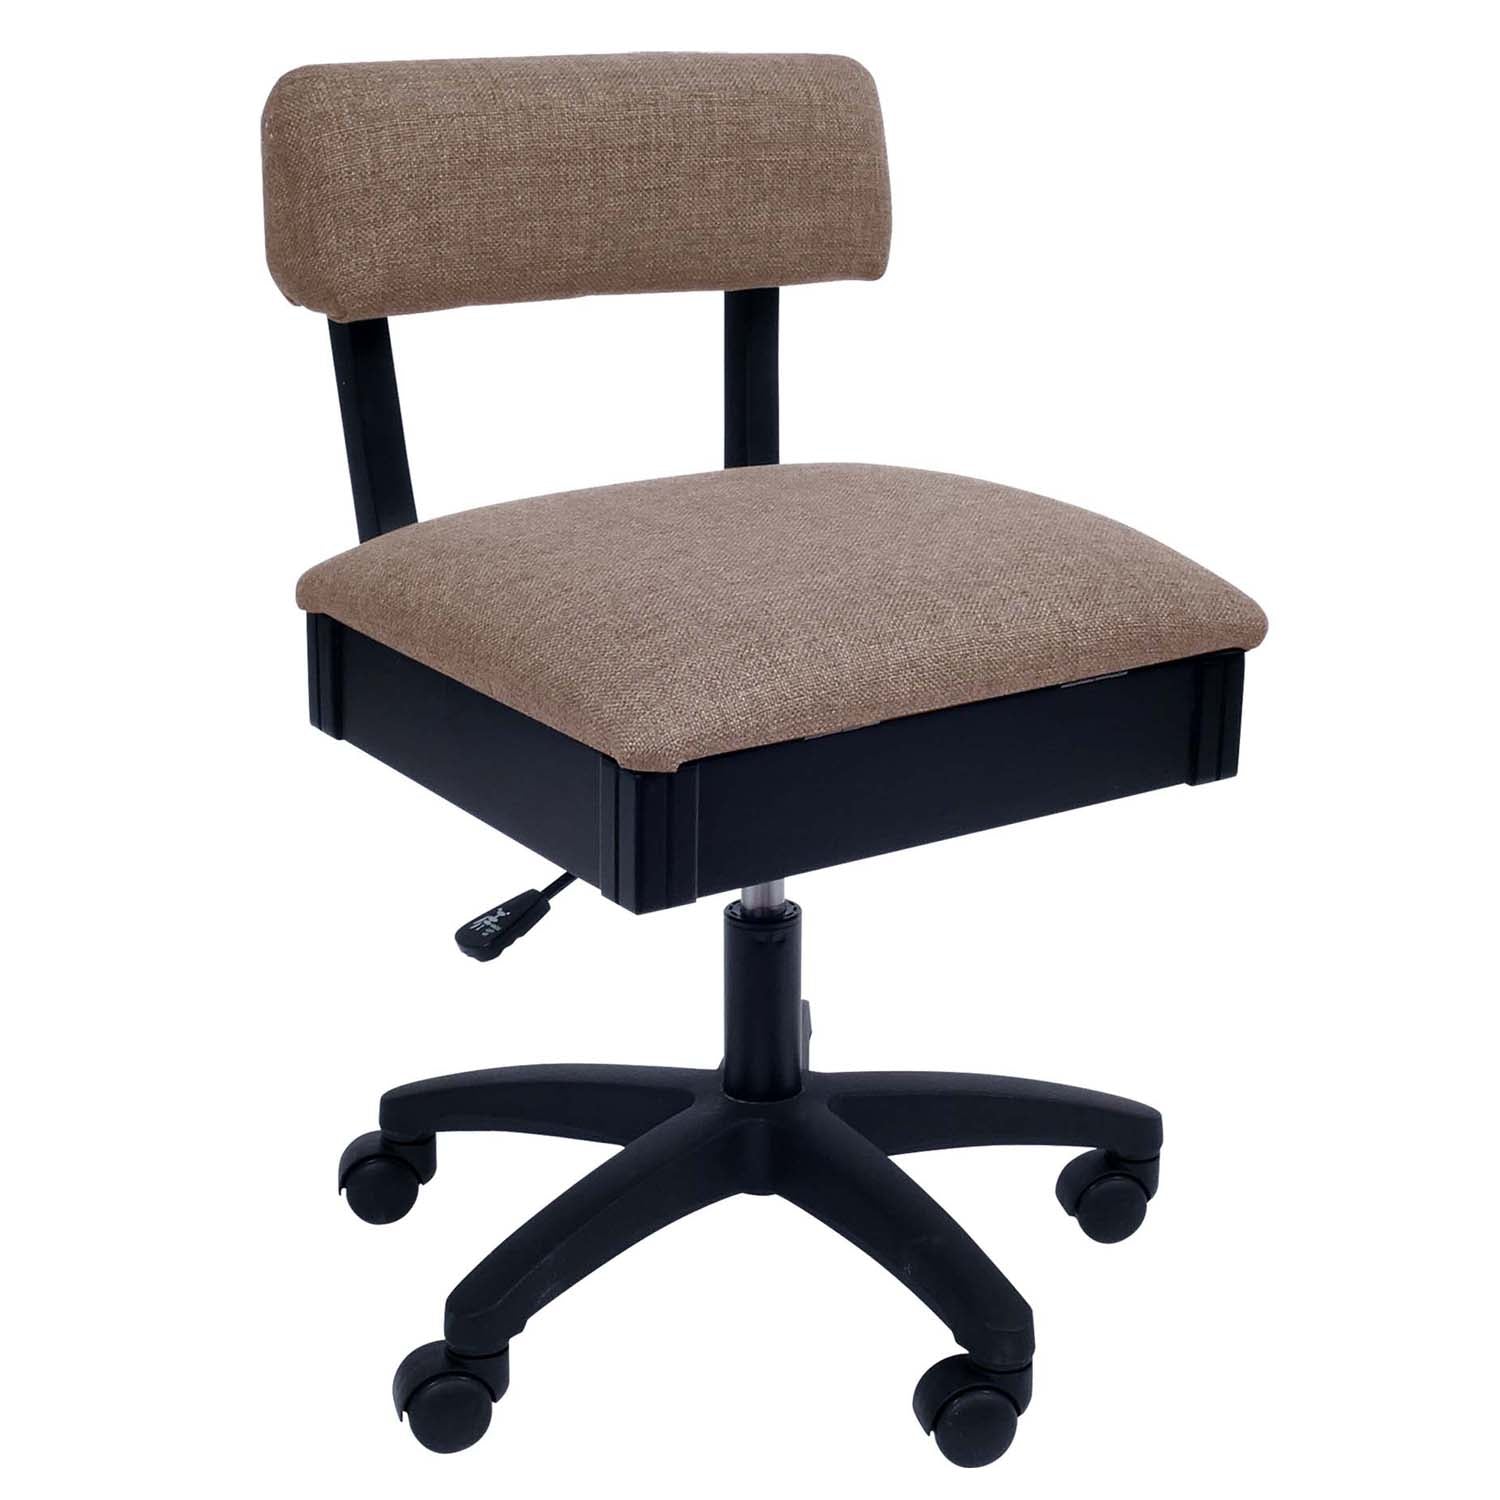 Arrow's Hydraulic Sewing Chairs in 5 Colors 